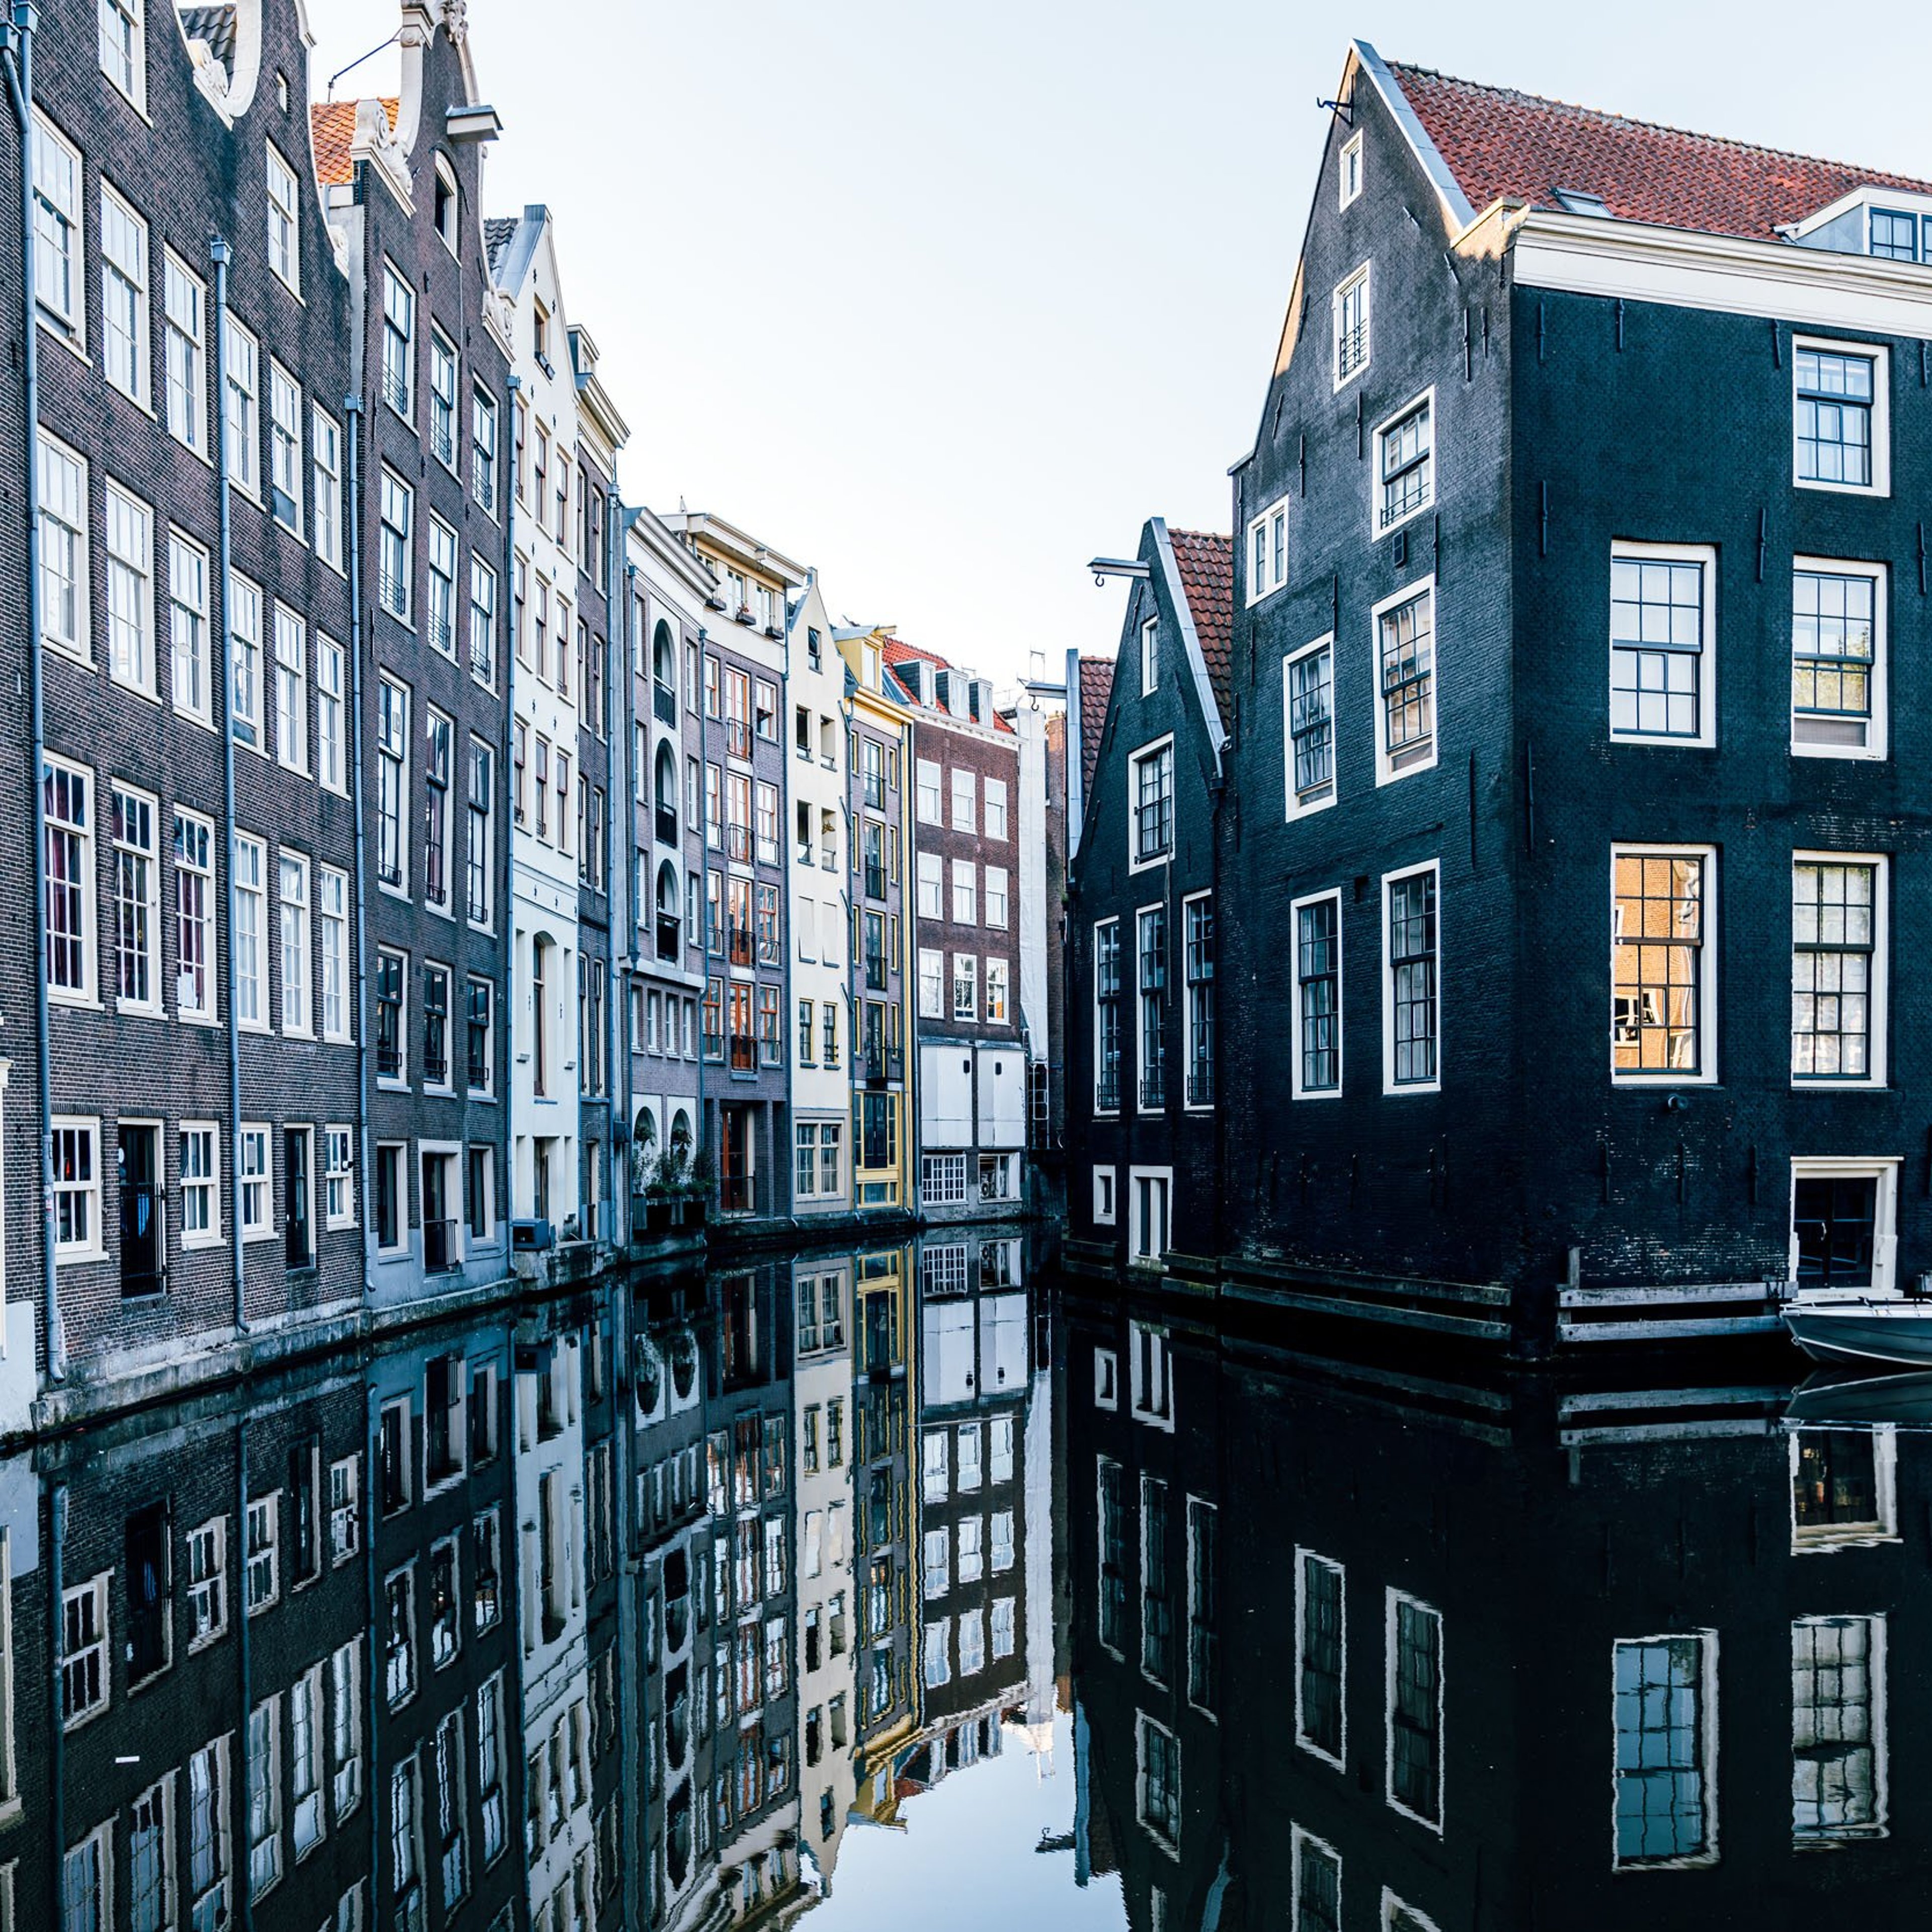 Traditional Dutch houses reflecting in the canal, Amsterdam, Netherlands.